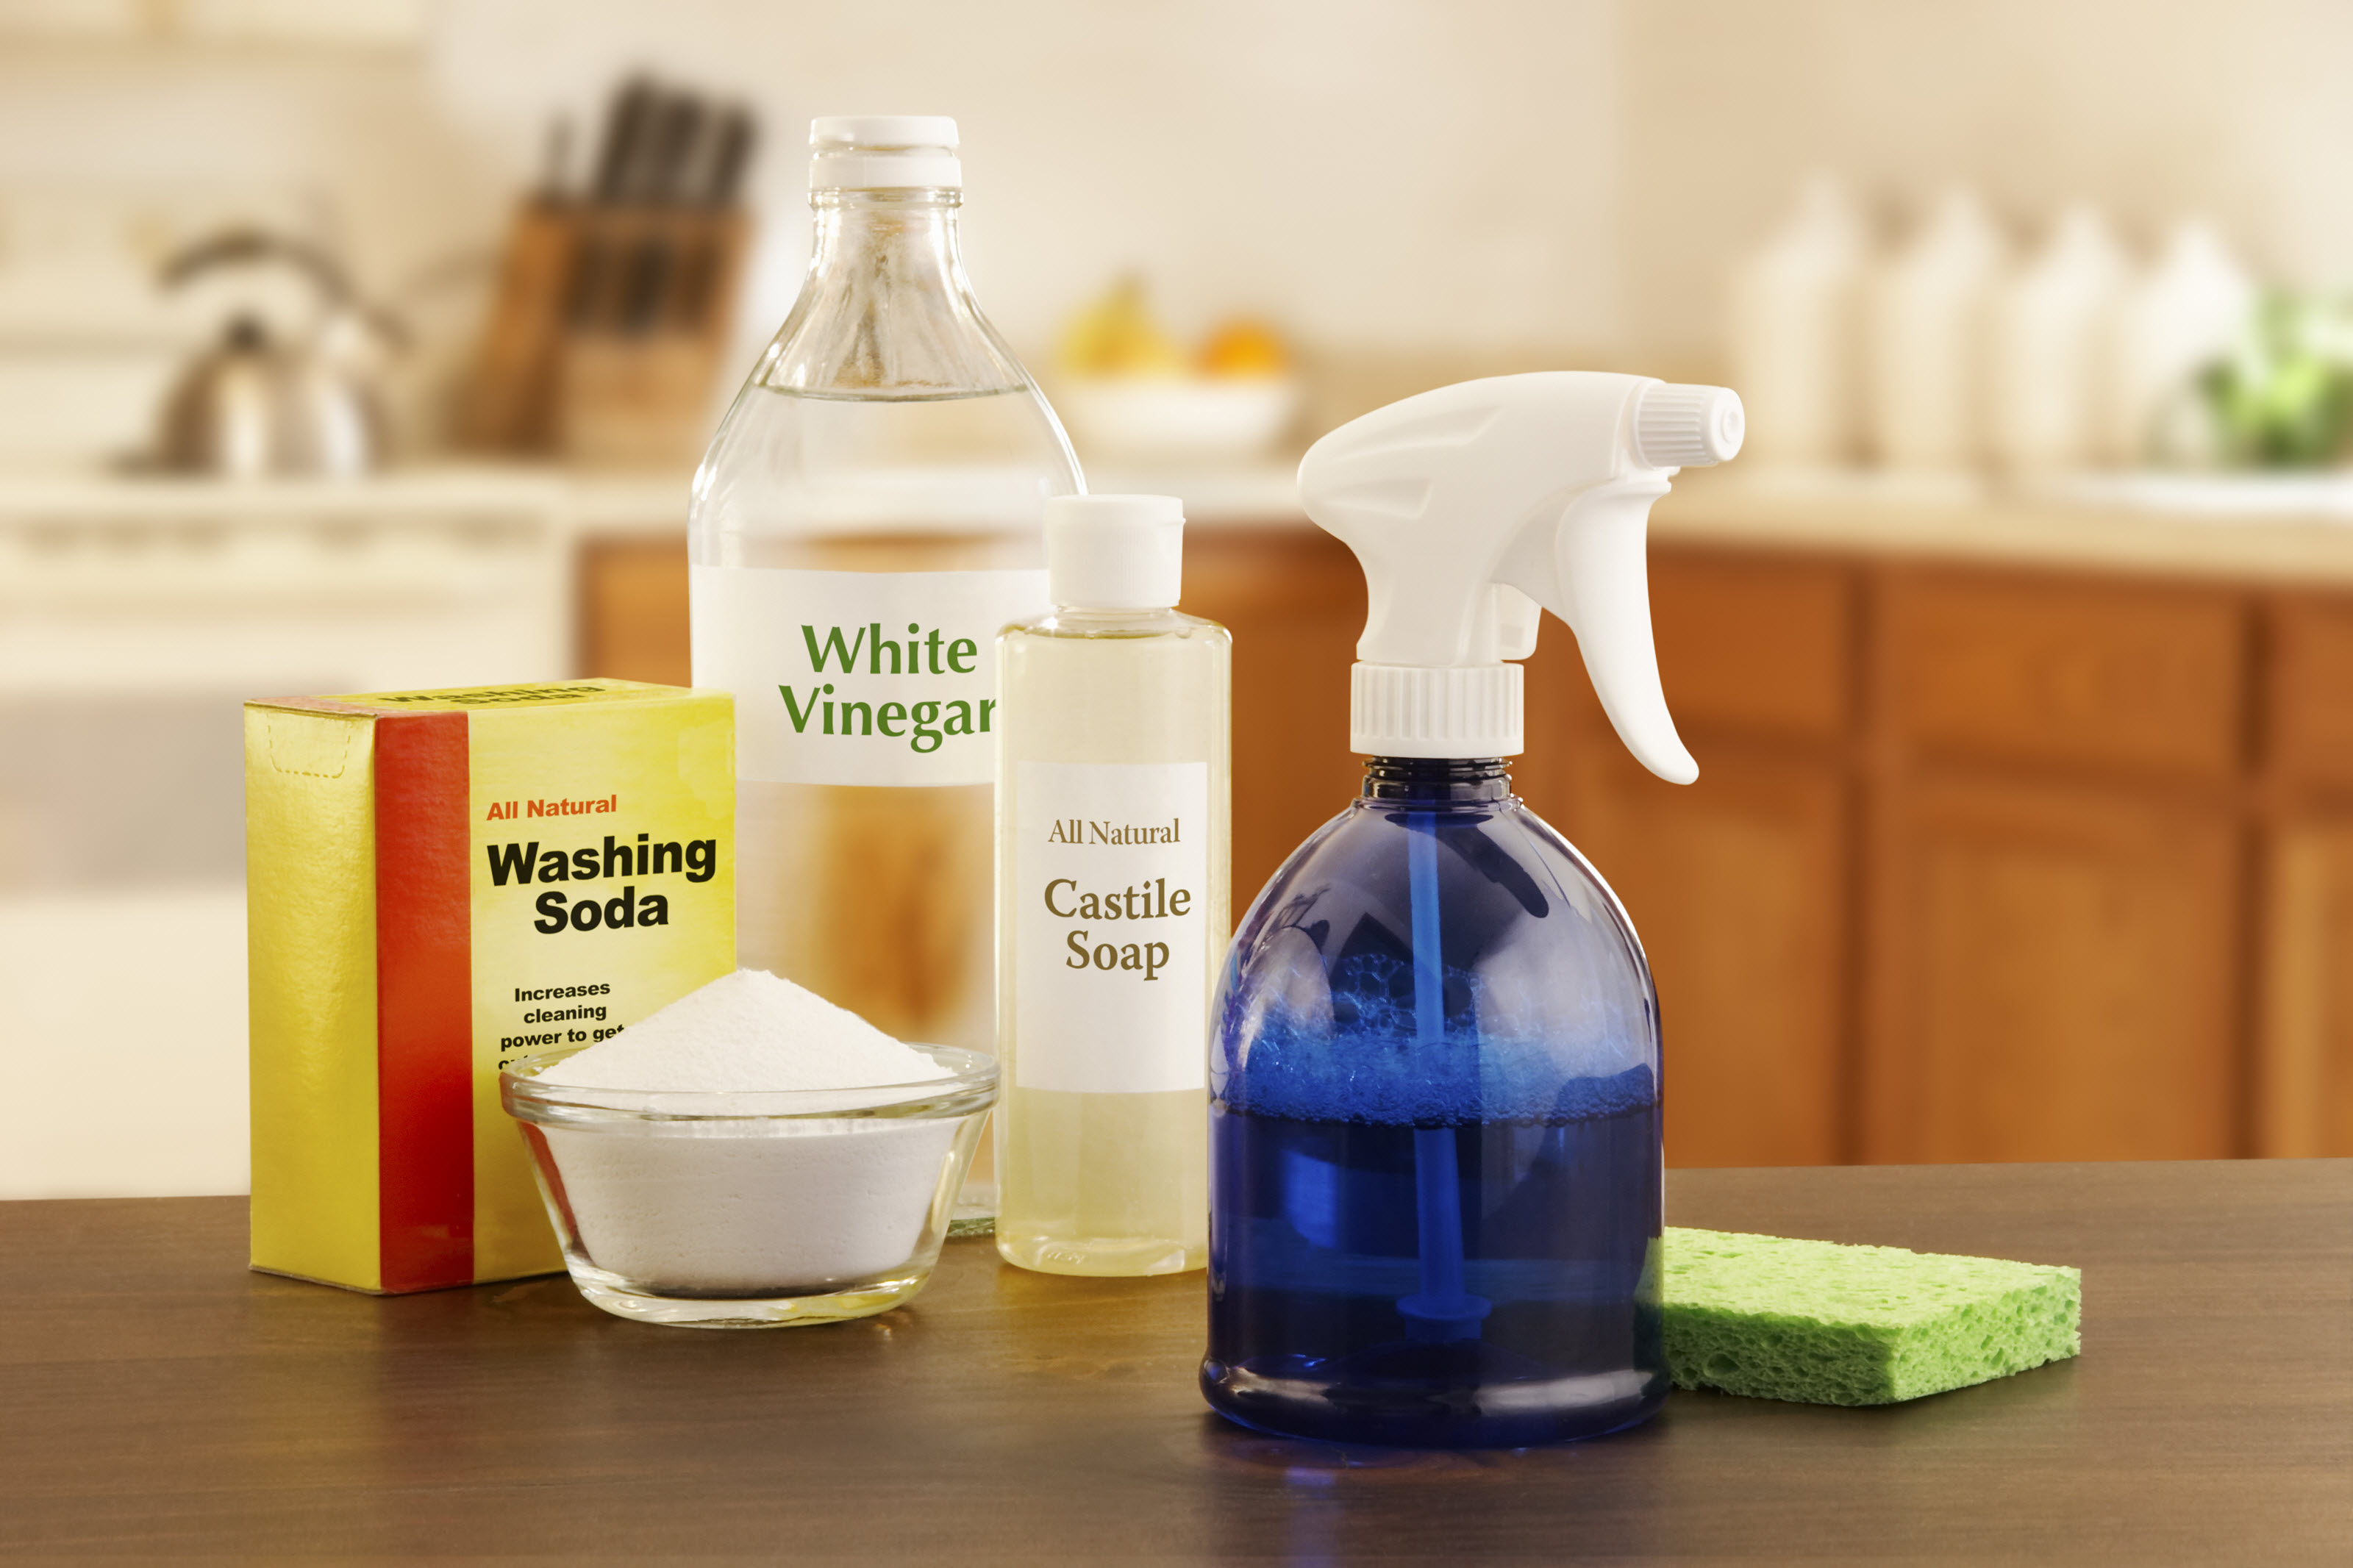 Which Is the Best Green Cleaning Product? - Dengarden